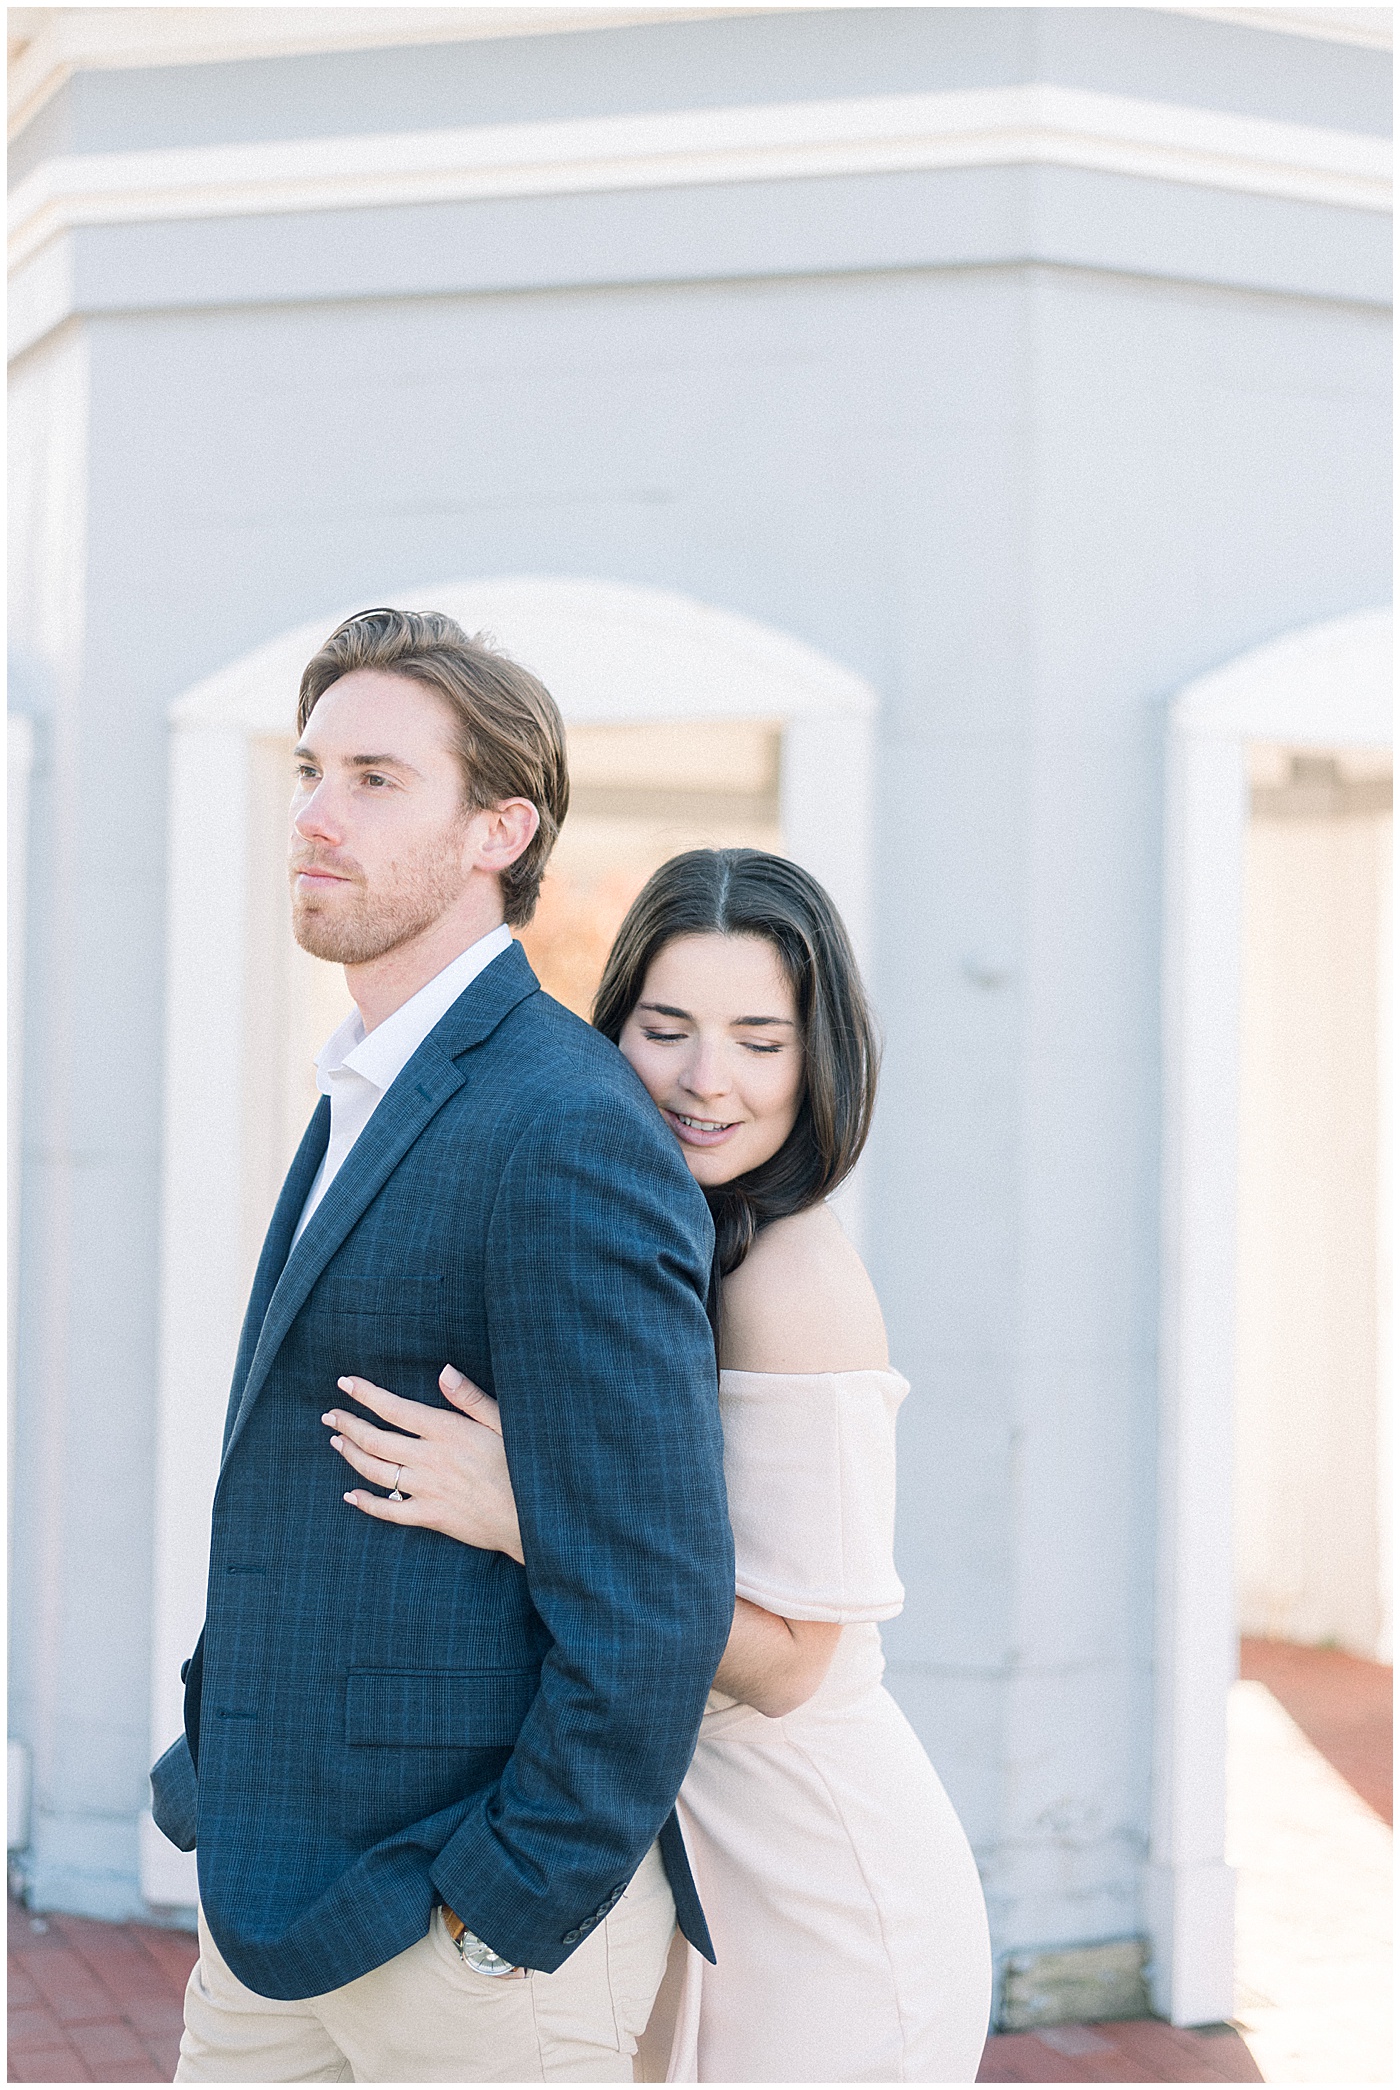 Engagement Portraits at The BMI